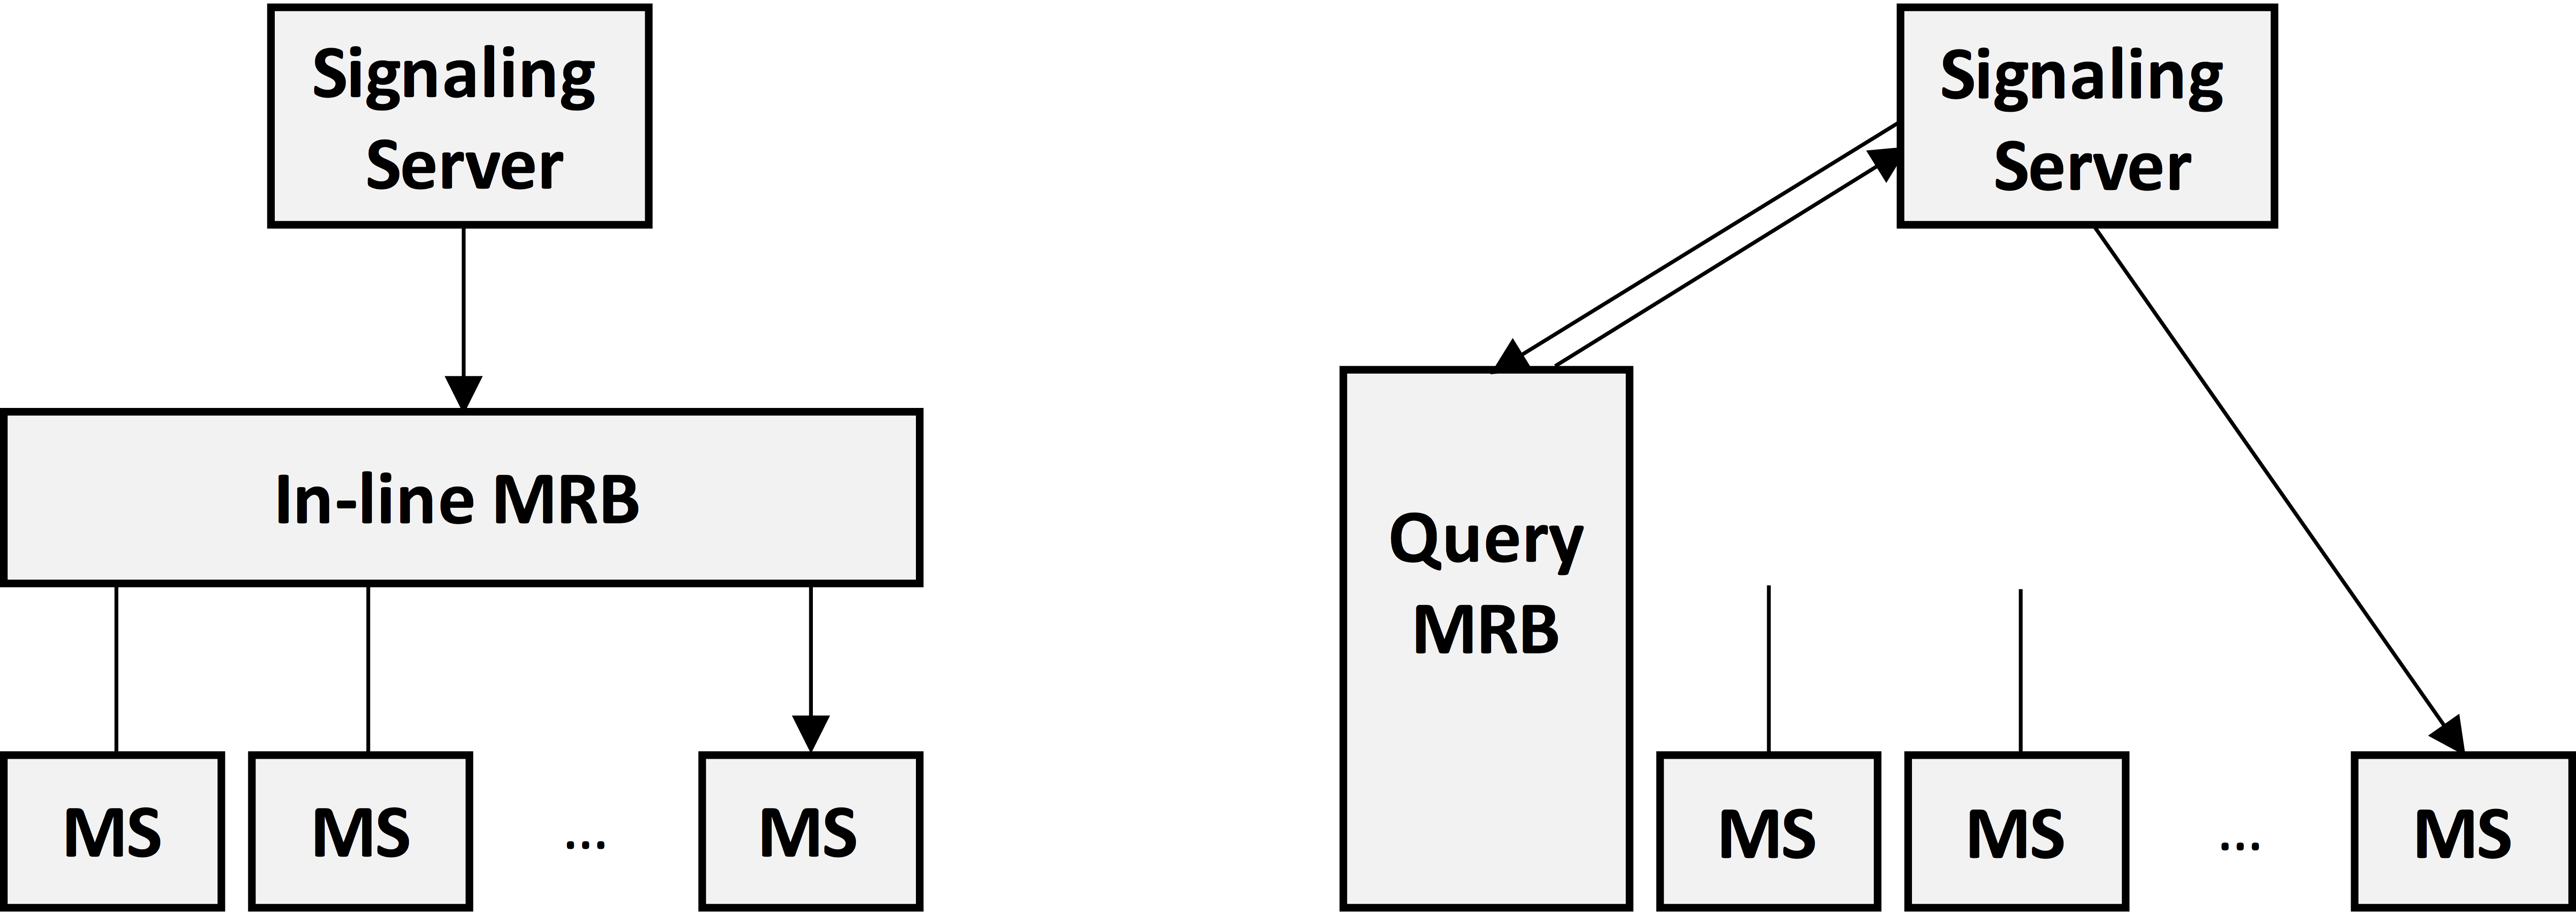 Fig. 2. Common configurations for deploying Media Server (MS) instances in the cloud through a Media Resource Brokers (MRB) based architecture. In modern cloud deployments, in addition to load-balancing, the MRB must provide further additional services such as autoscaling, resource provisioning, resource deployment, SLA (Service Level Agreement) enforcement, etc.